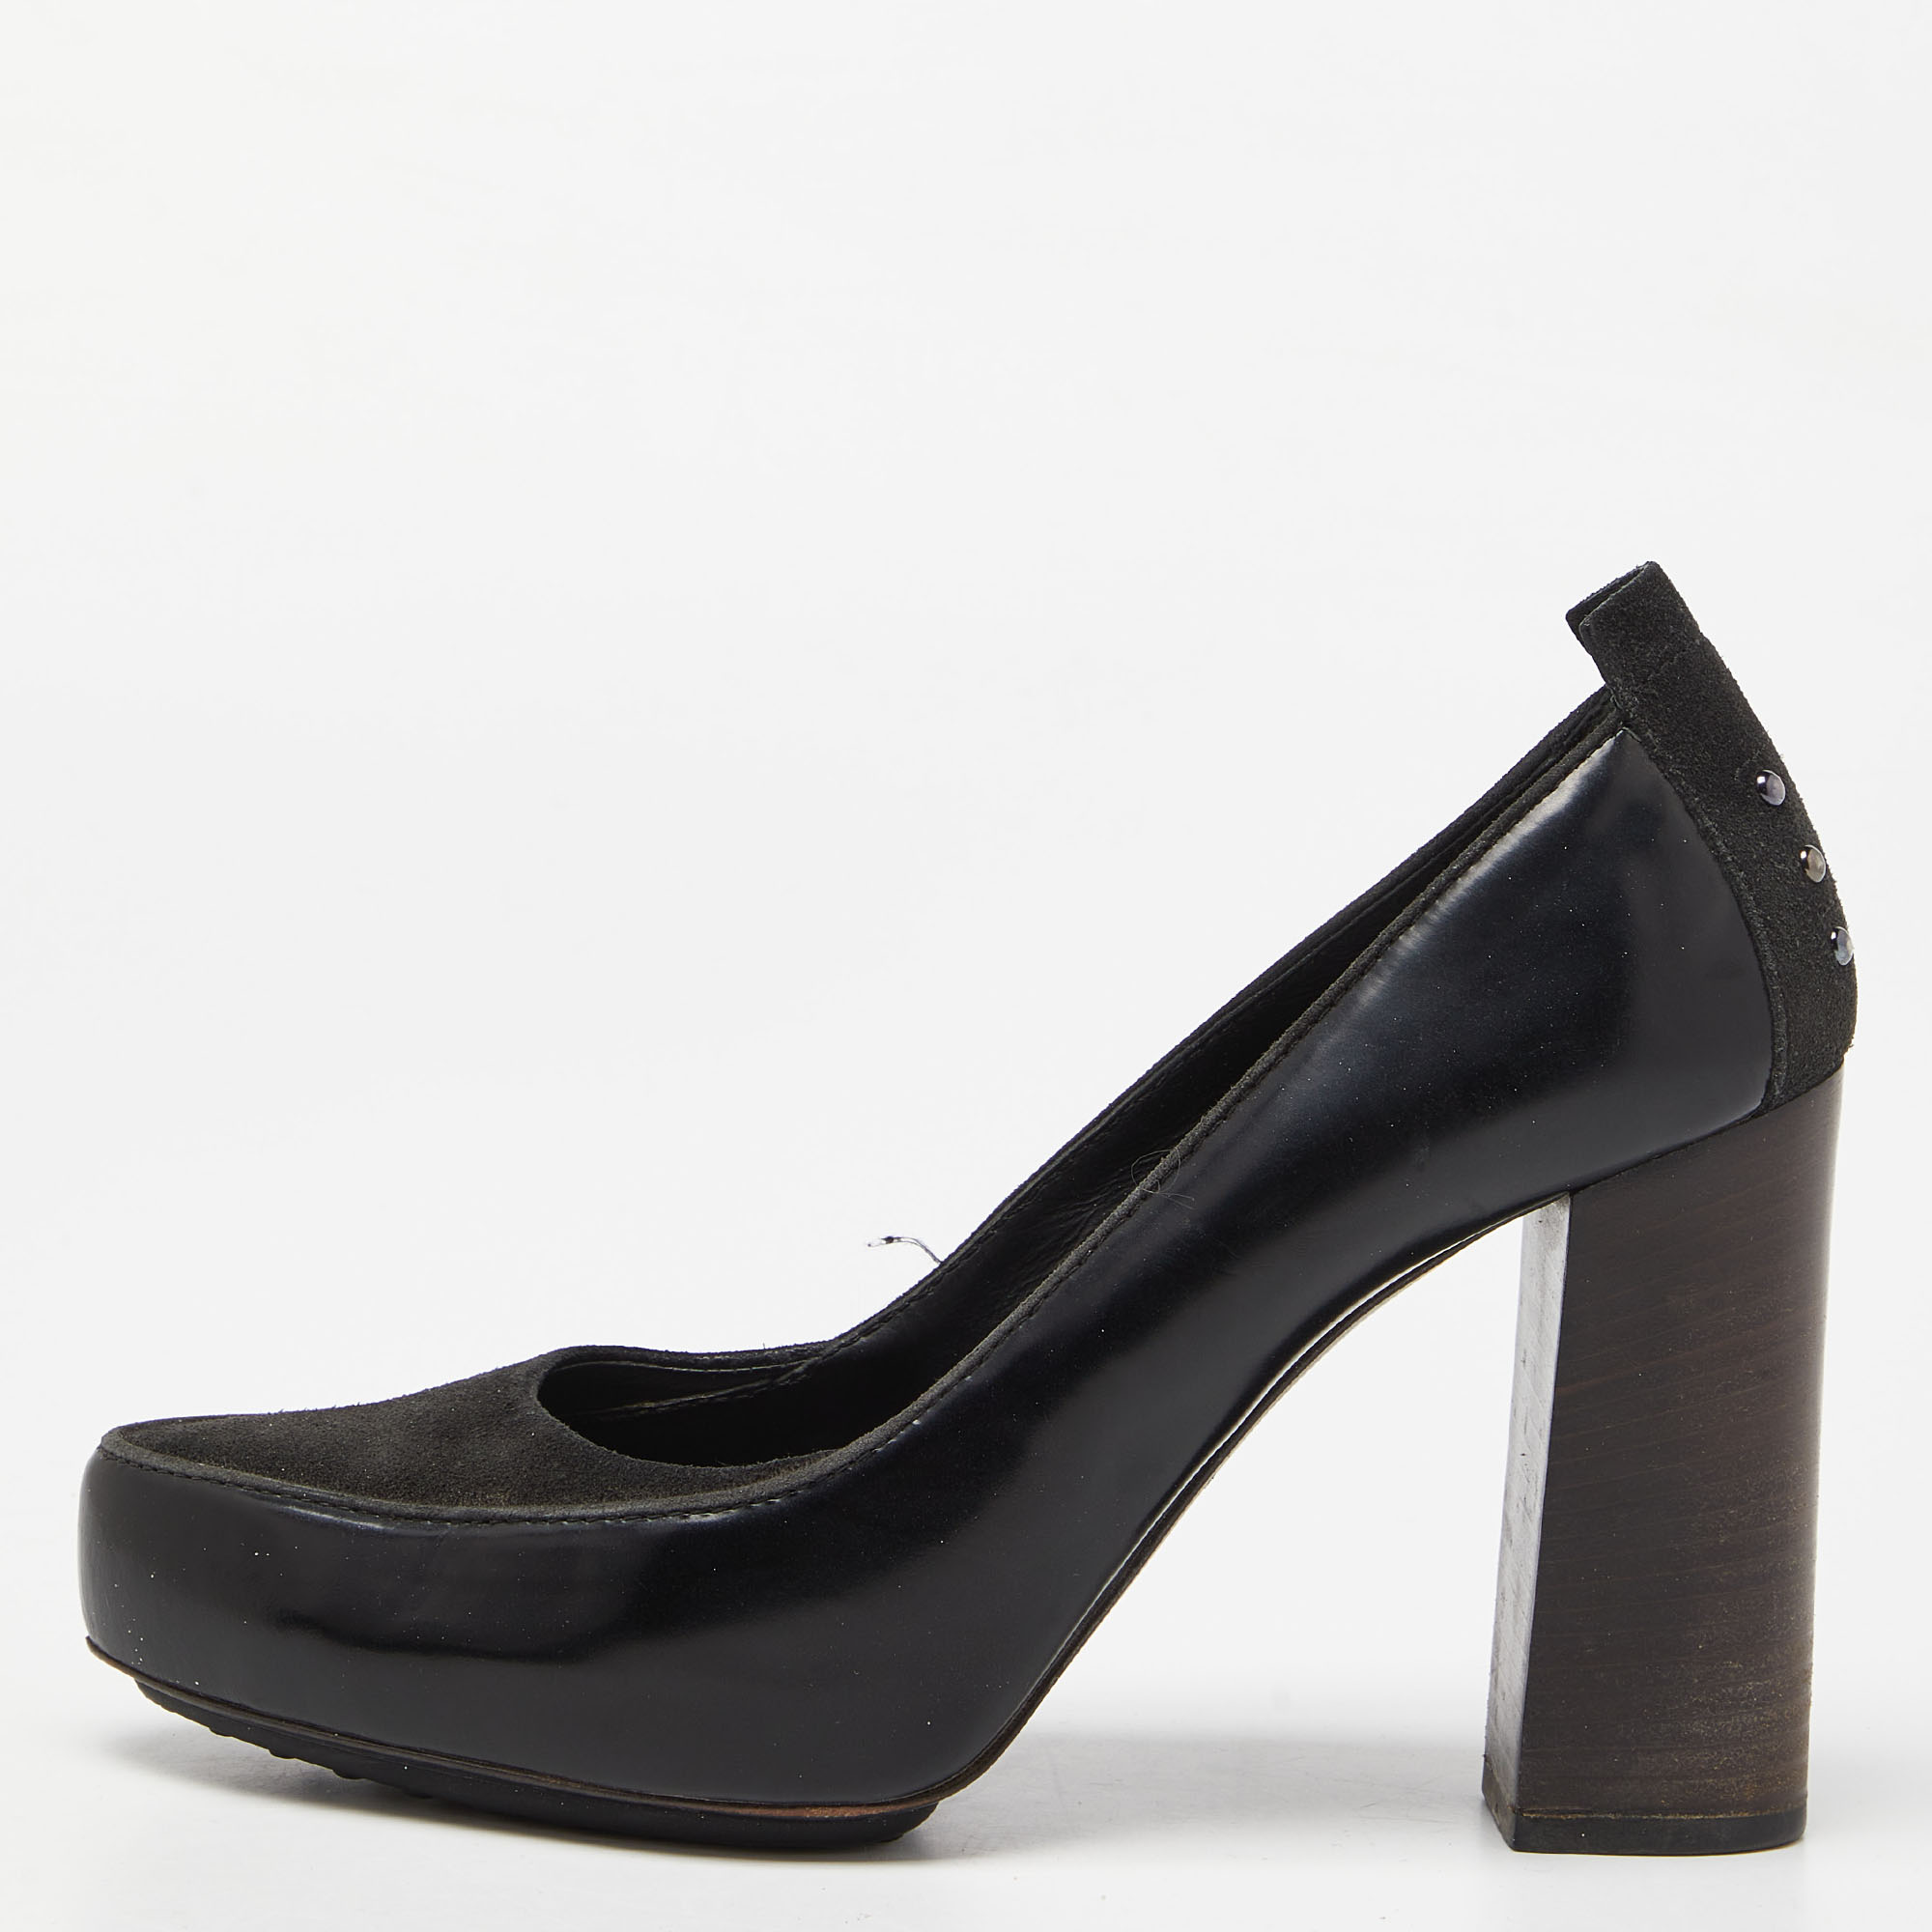 Tod's black suede and leather platform pumps size 39